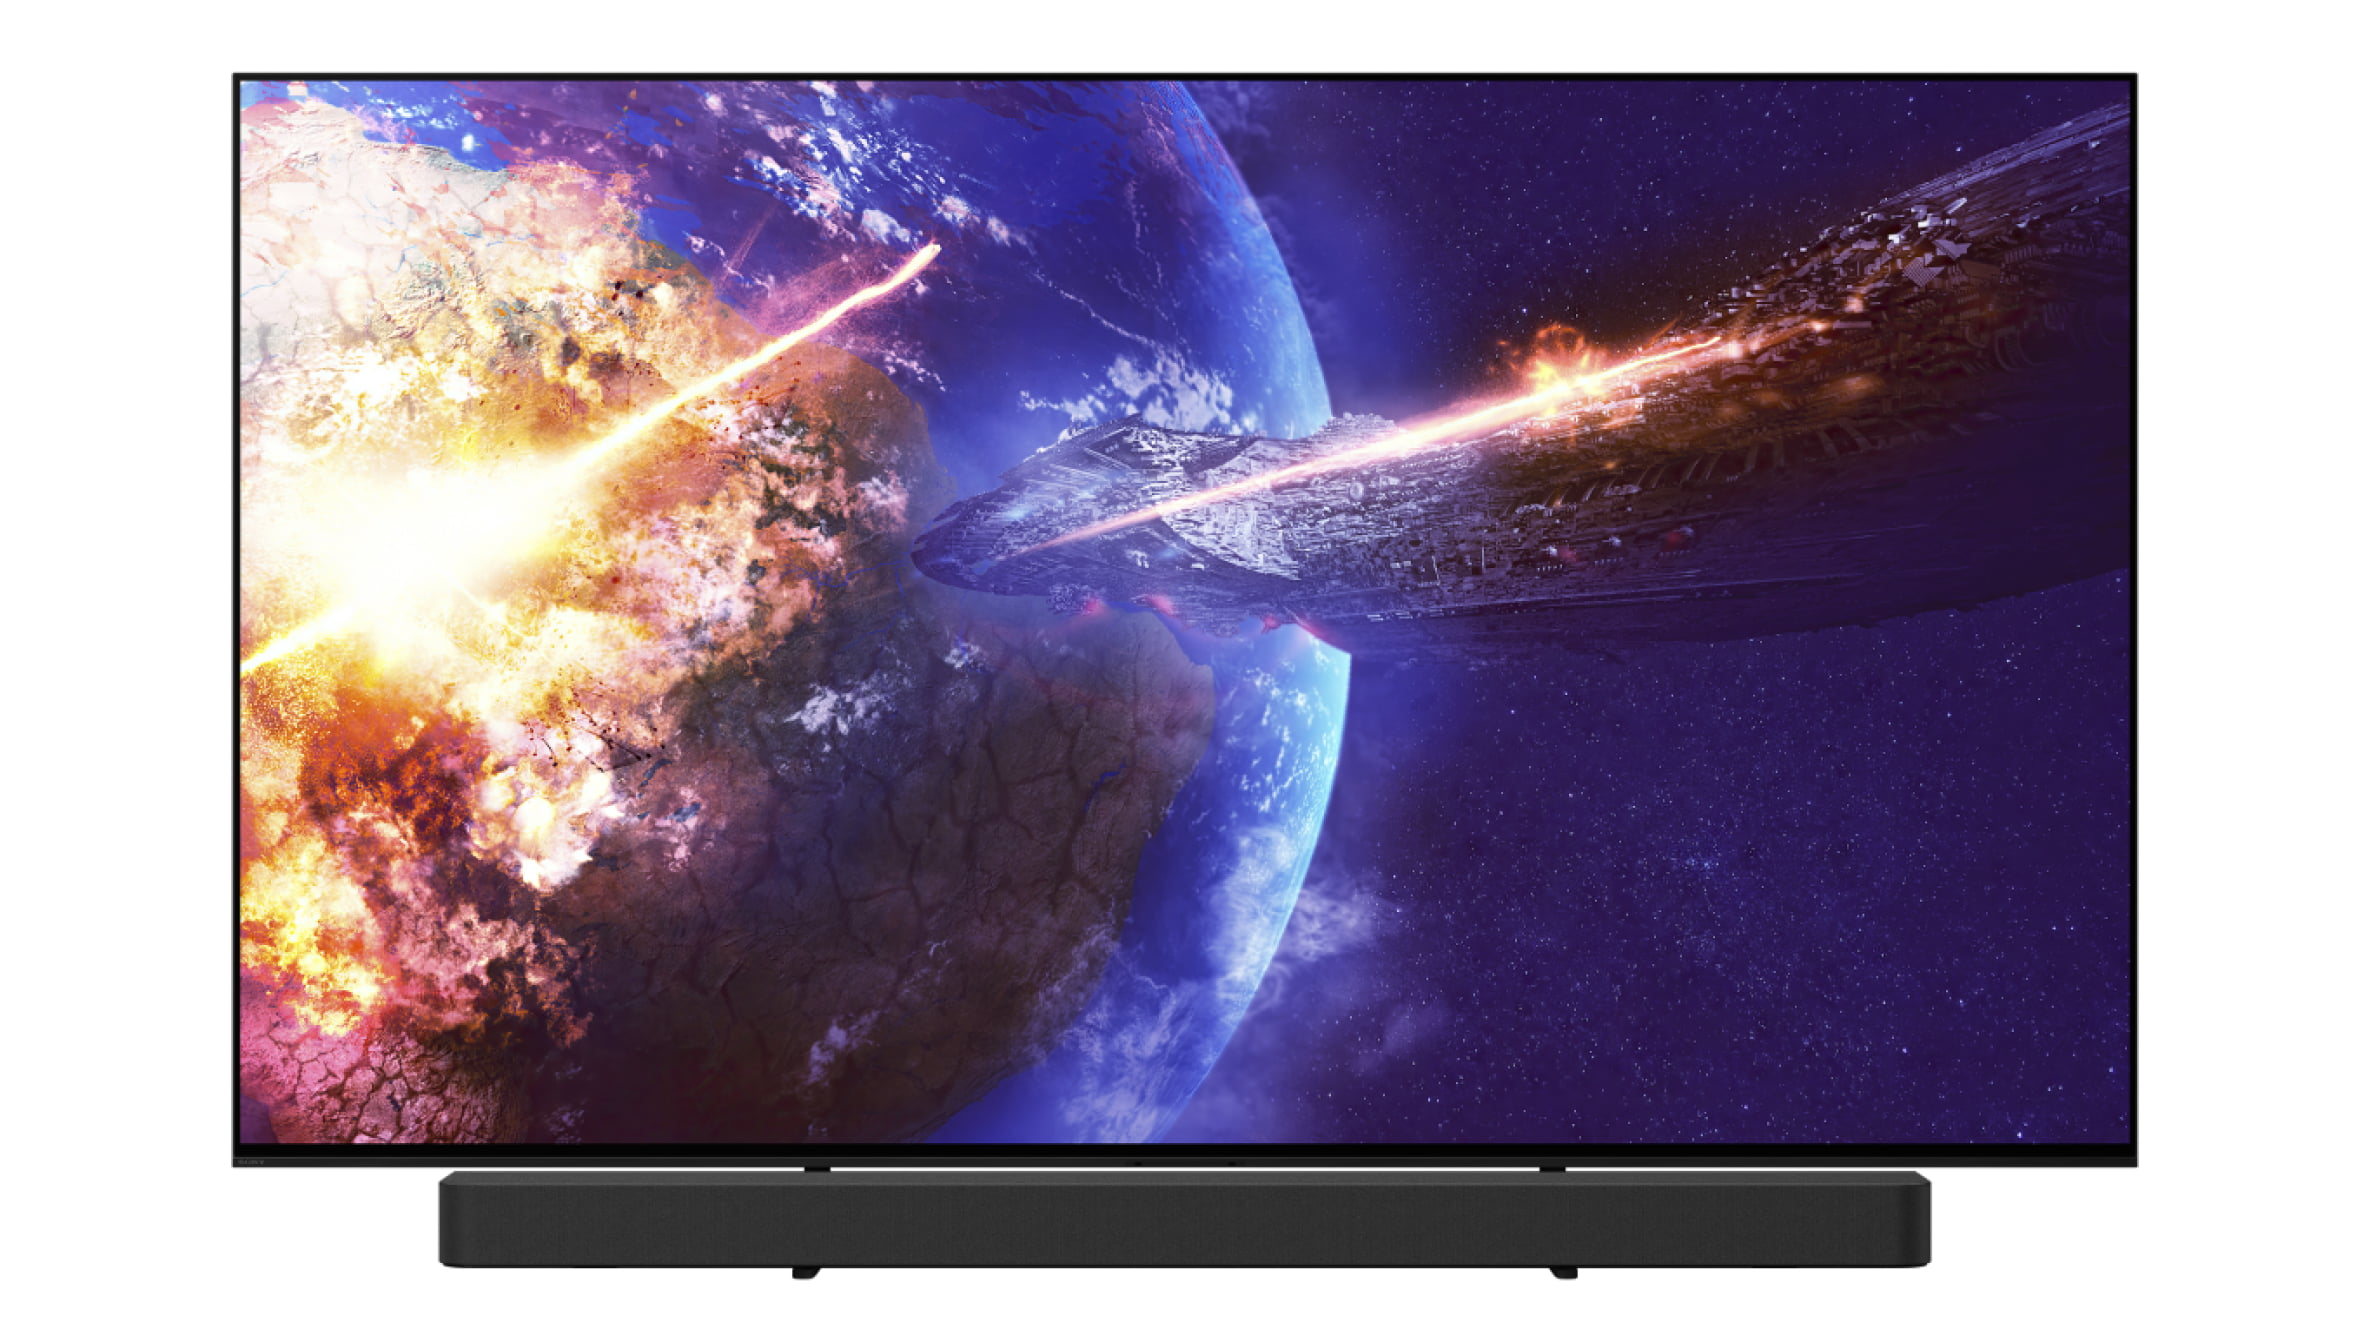 BRAVIA 8 Perfectly integrates TV and soundbar, almost no stand visible